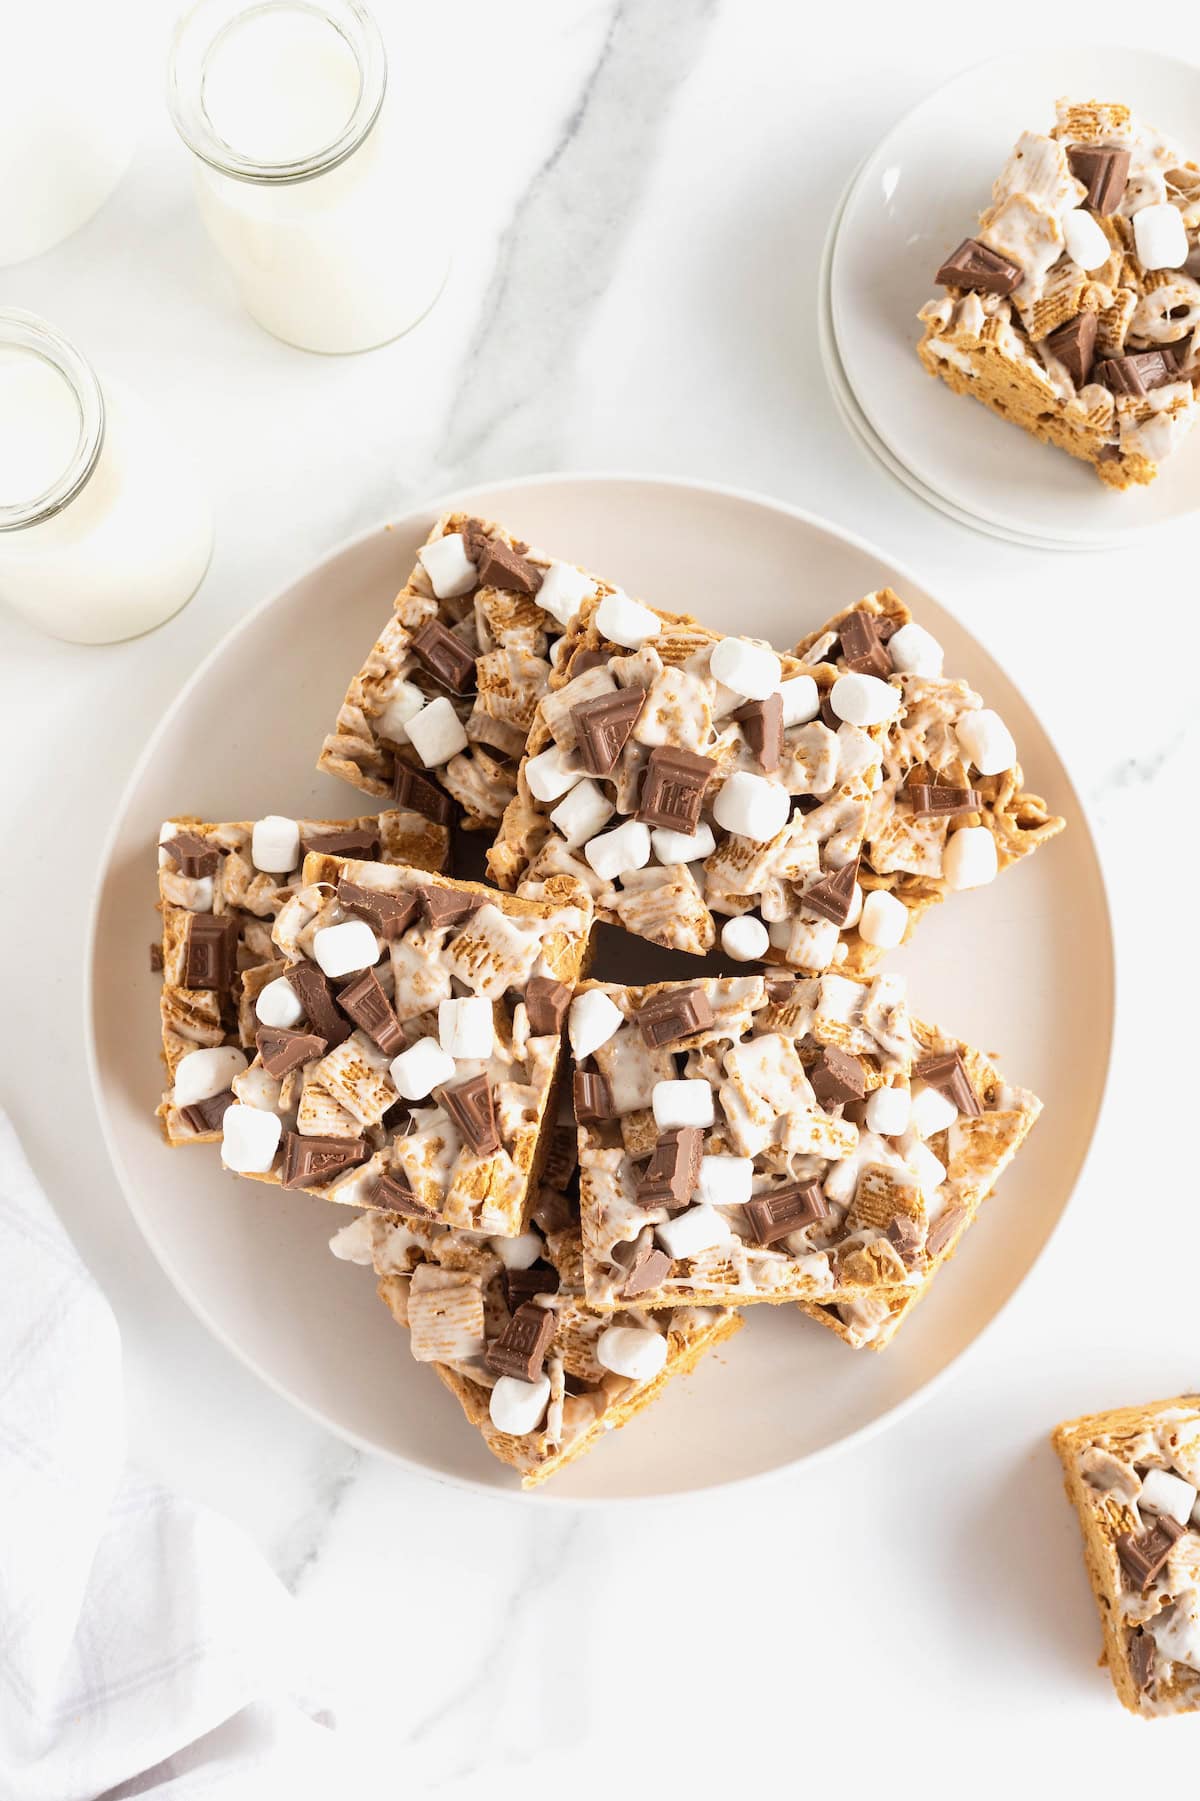 A large white plate stacked with no-bake s'mores bars on a white counter.